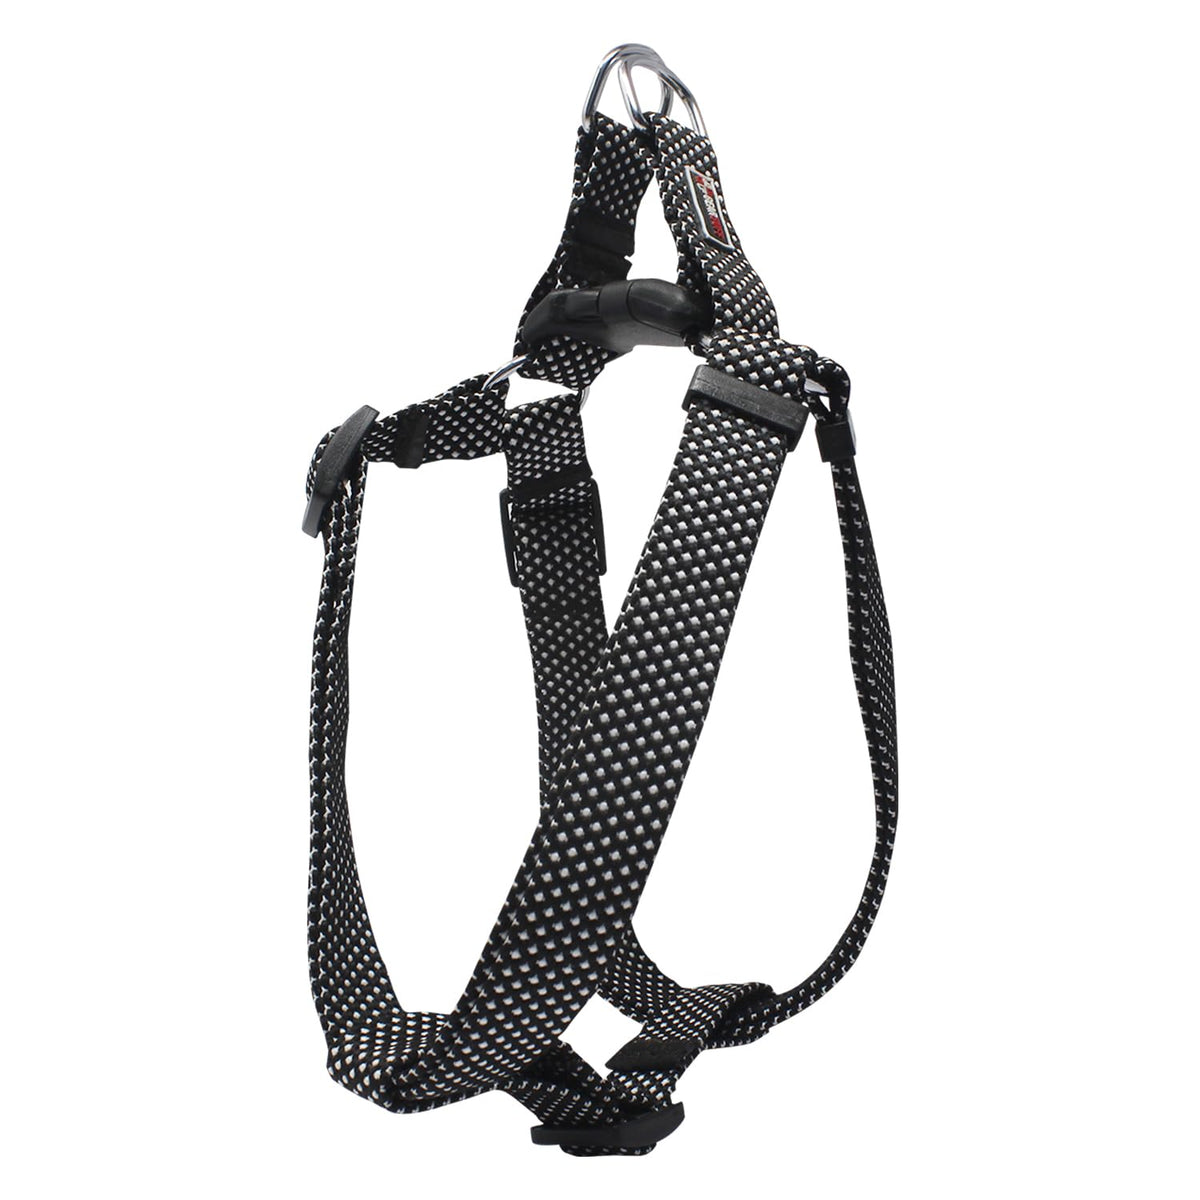 Gearbuff Club Range of Harness | Adjustable | Breakproof | Escape Proof Dog Harness for All Dog Pets| Dog Essentials | Walking & Training | Soft Textured Chest Harness | Easy Maintenance